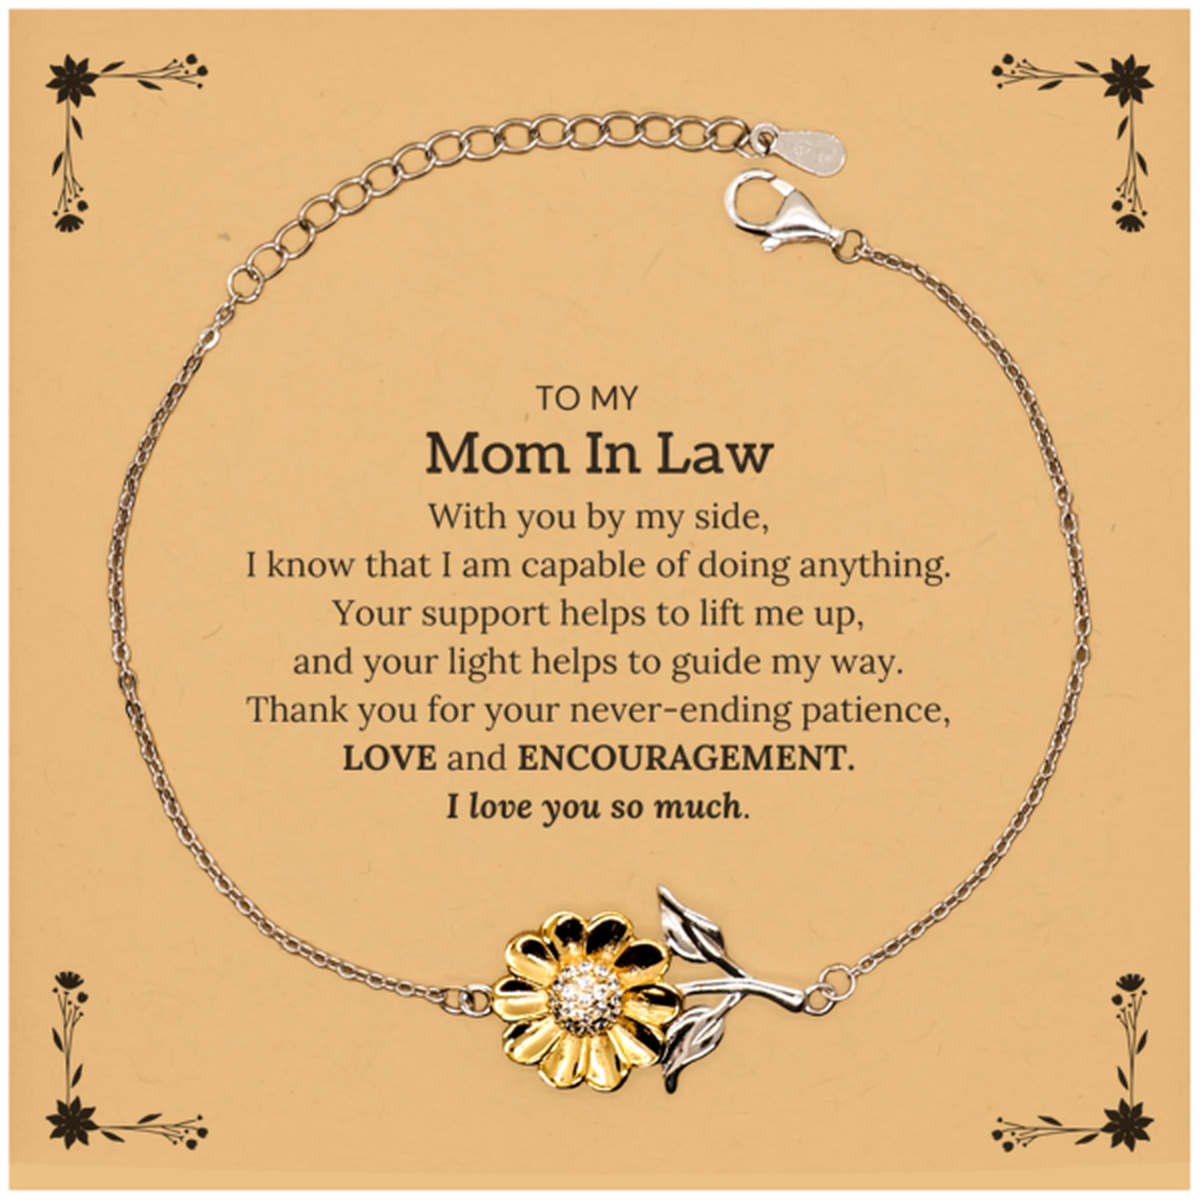 Appreciation Mom In Law Sunflower Bracelet Gifts, To My Mom In Law Birthday Christmas Wedding Keepsake Gifts for Mom In Law With you by my side, I know that I am capable of doing anything. I love you so much